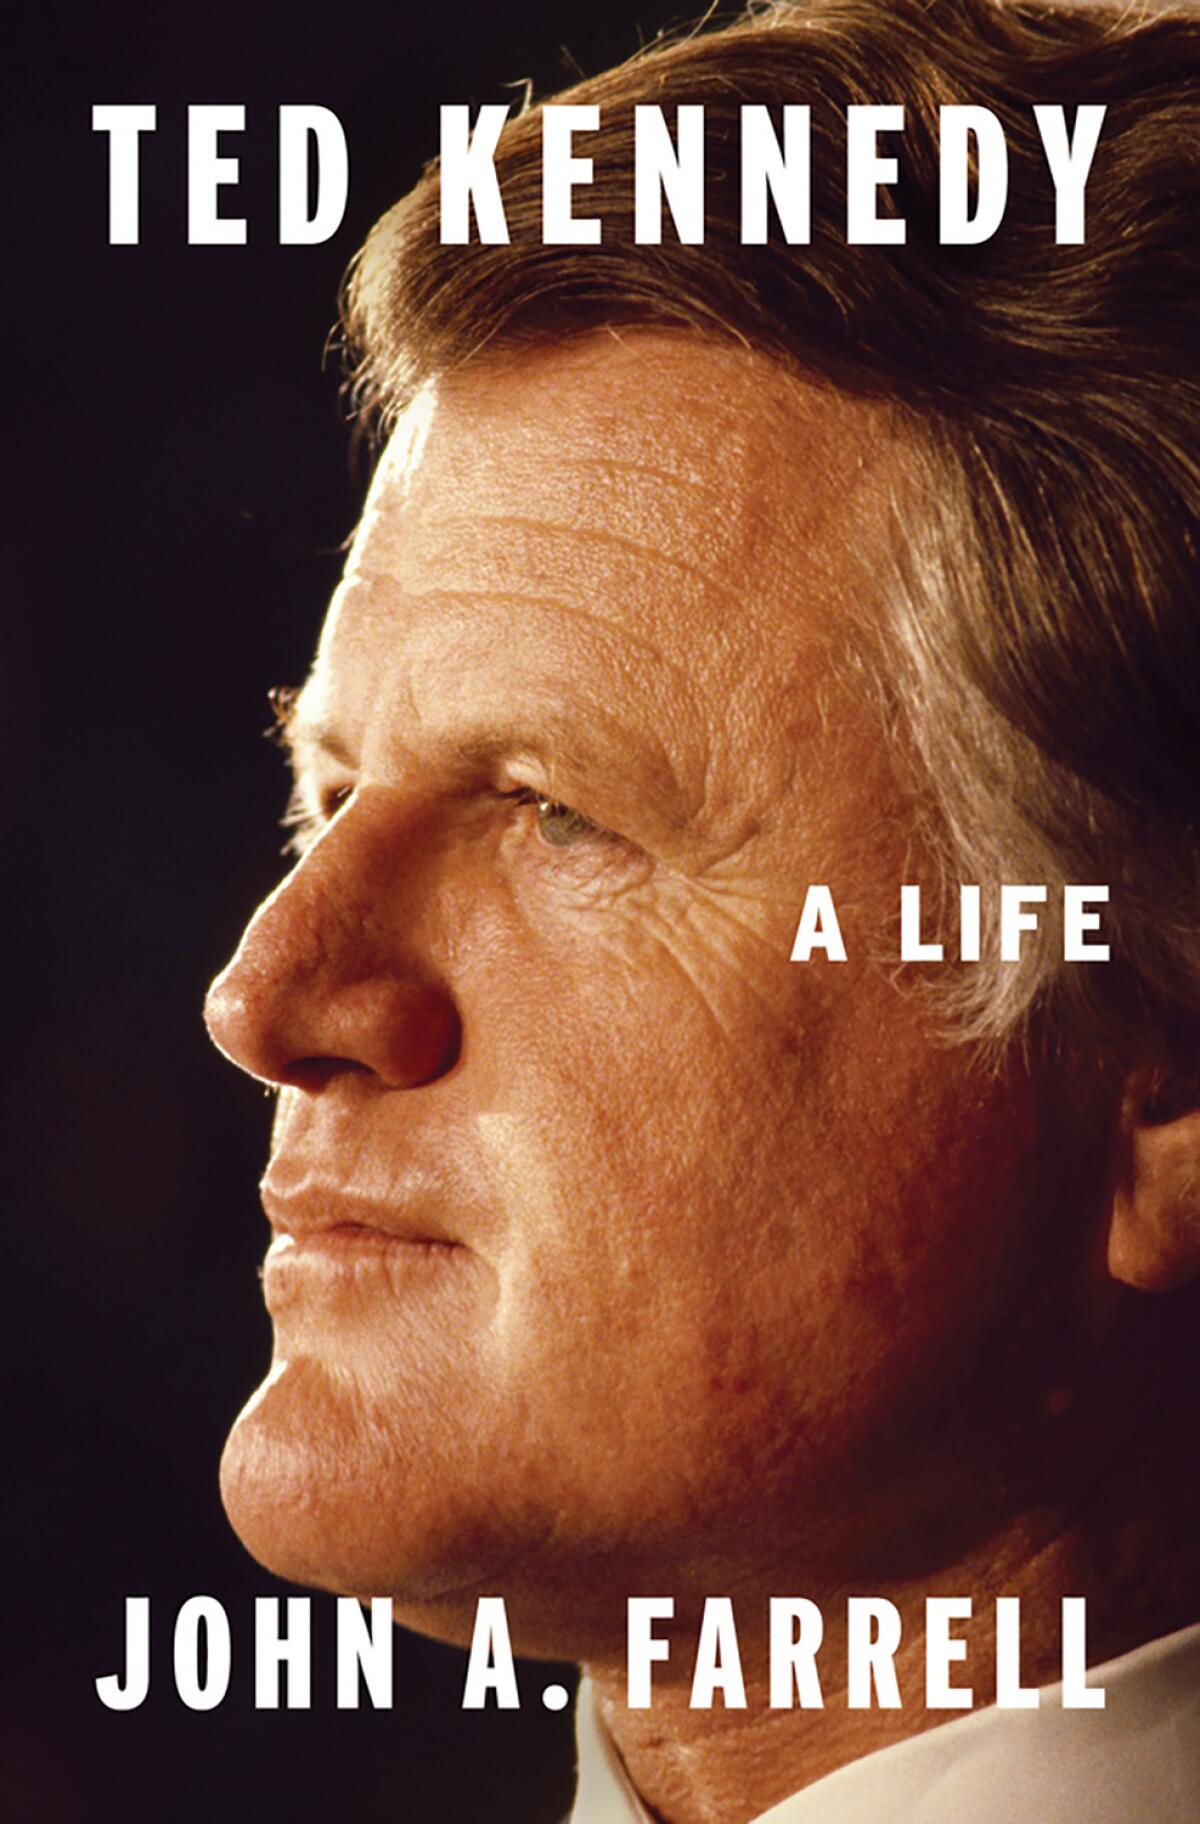 "Ted Kennedy: A Life" by John Farrell